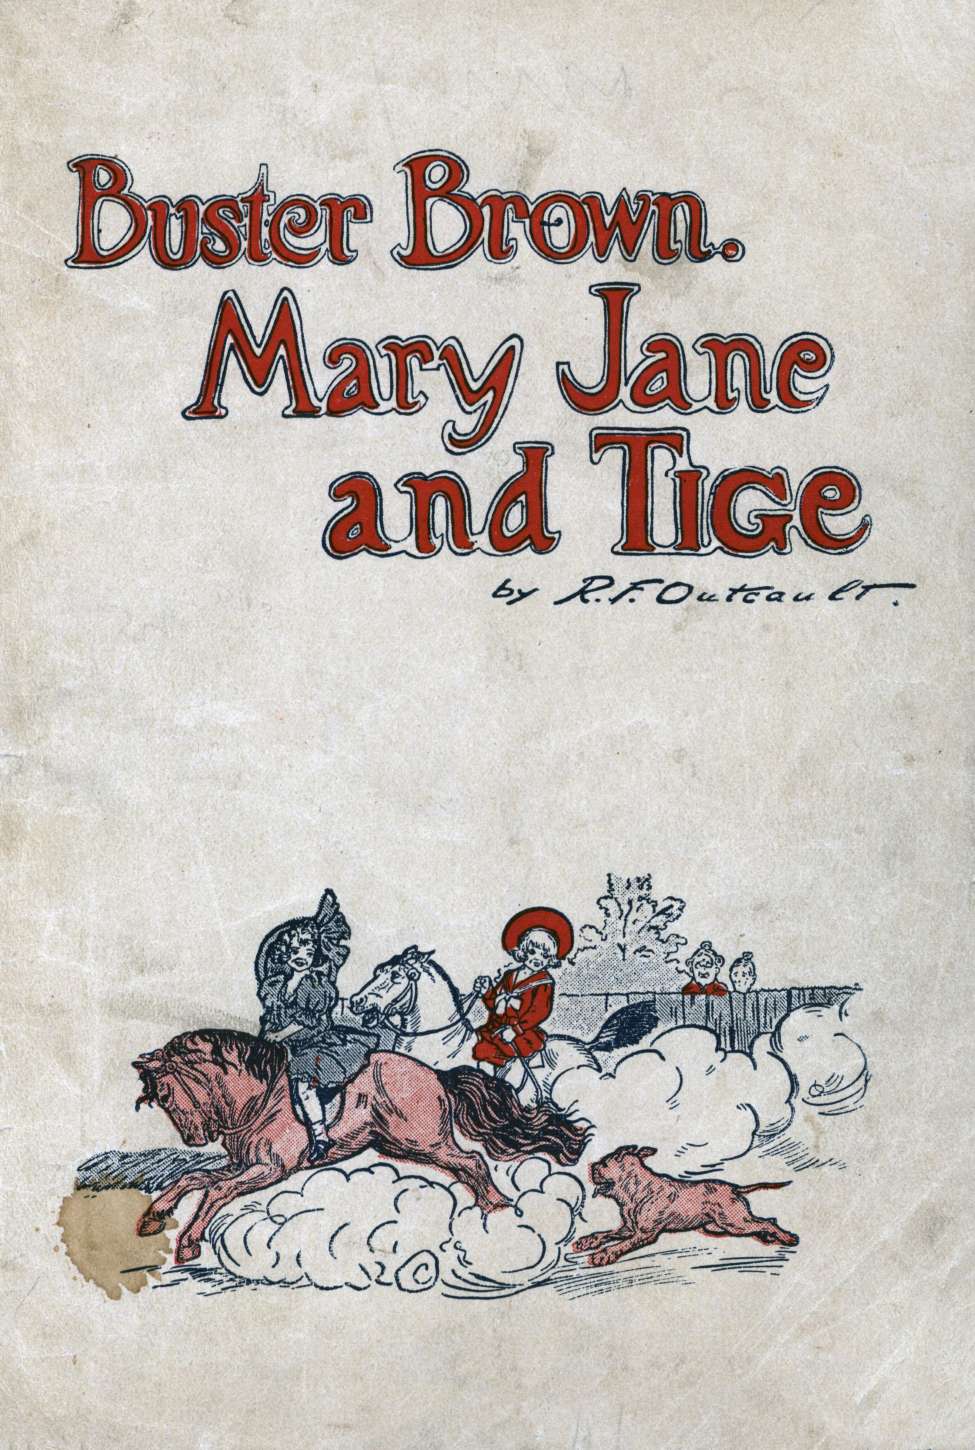 Book Cover For Buster Brown, Mary Jane and Tige